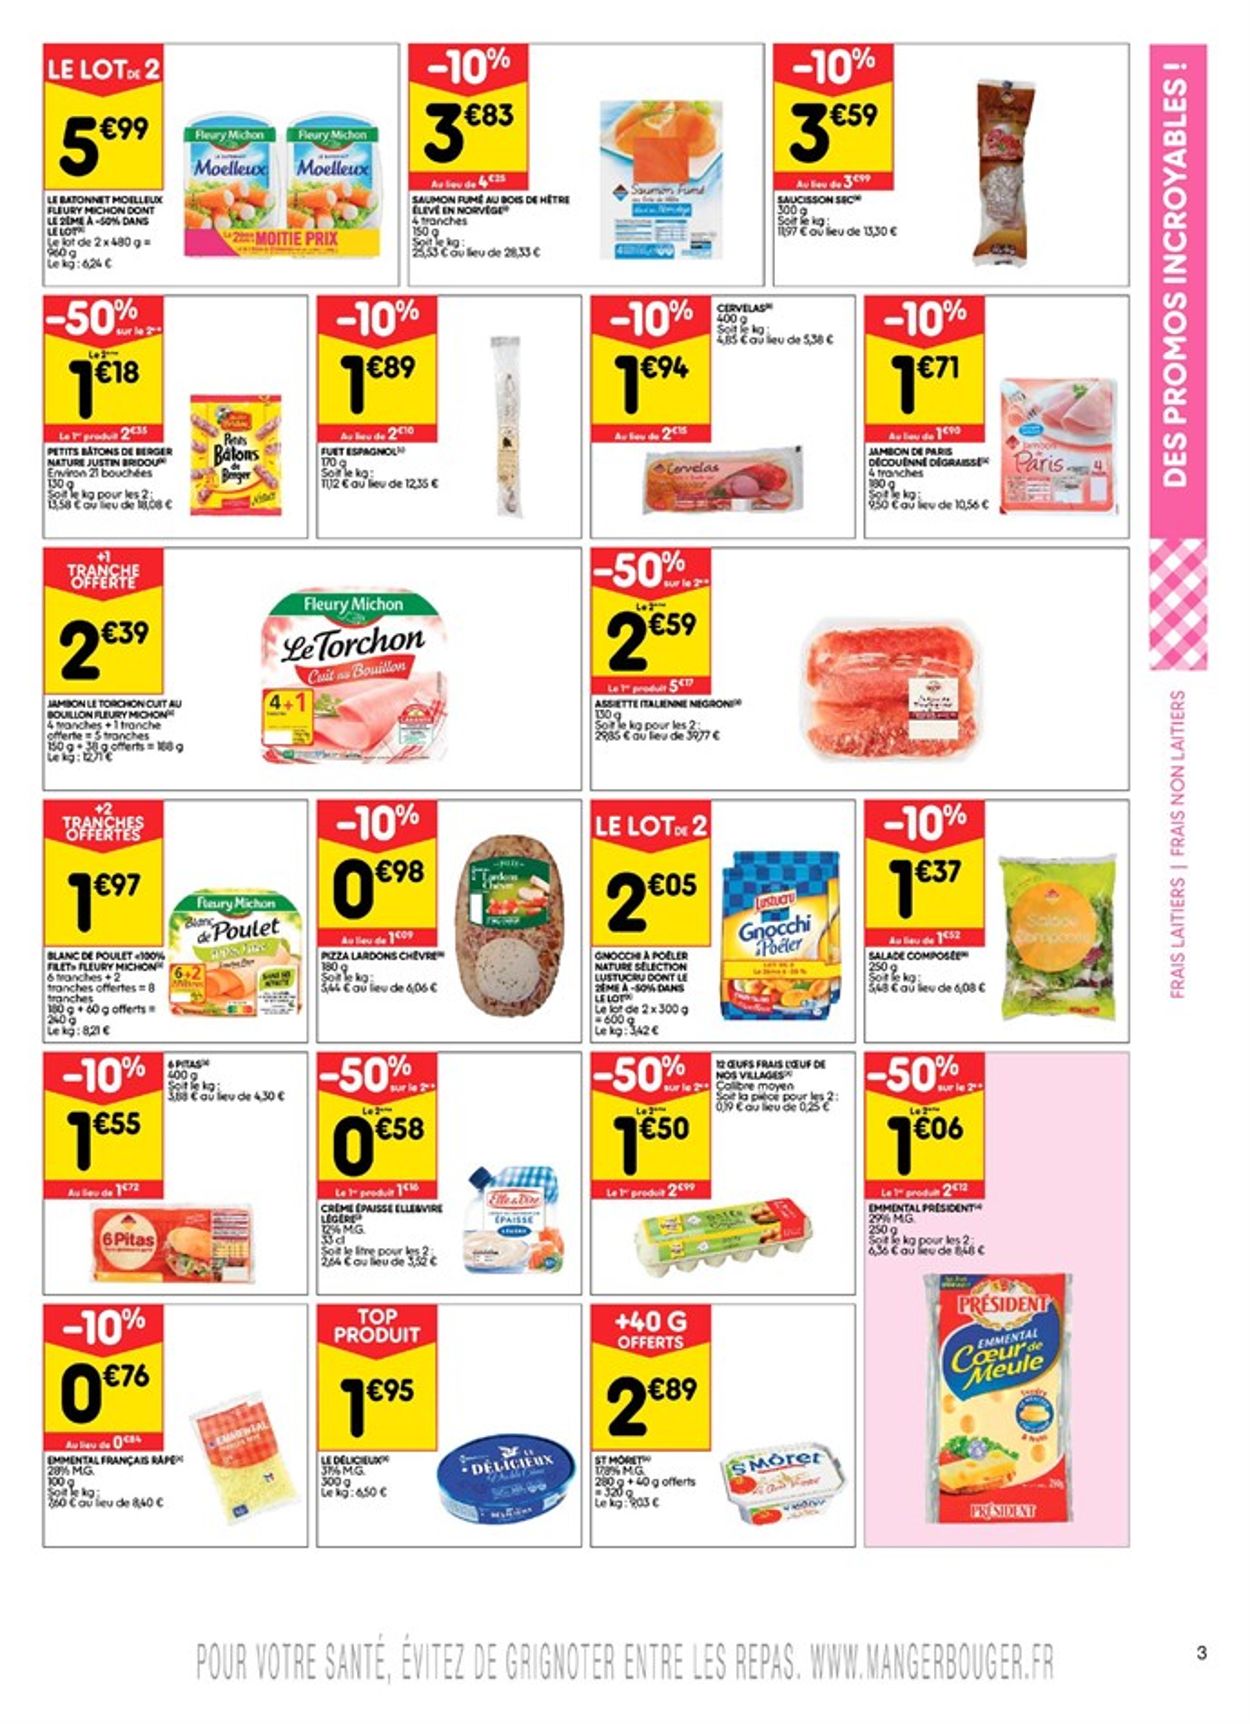 Leader Price Catalogue - 09.03-21.03.2021 (Page 3)